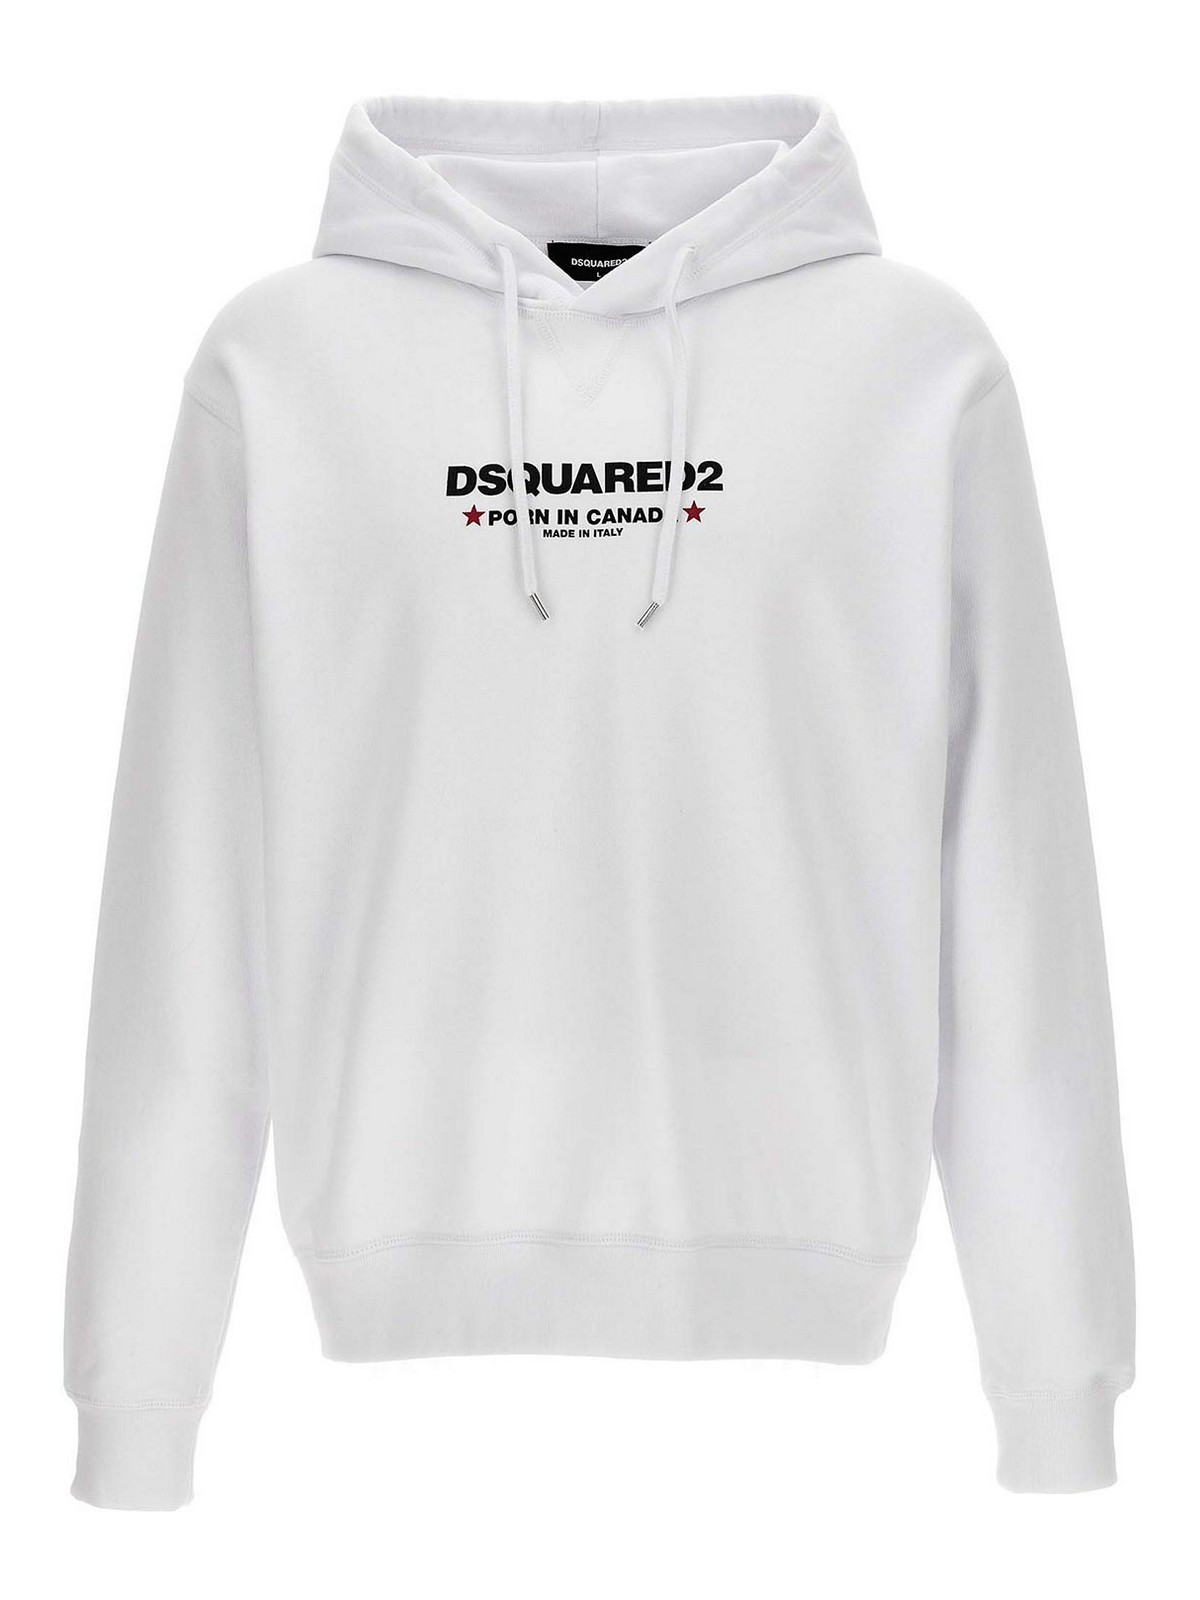 Shop Dsquared2 Porn In Canada Hoodie In Blanco